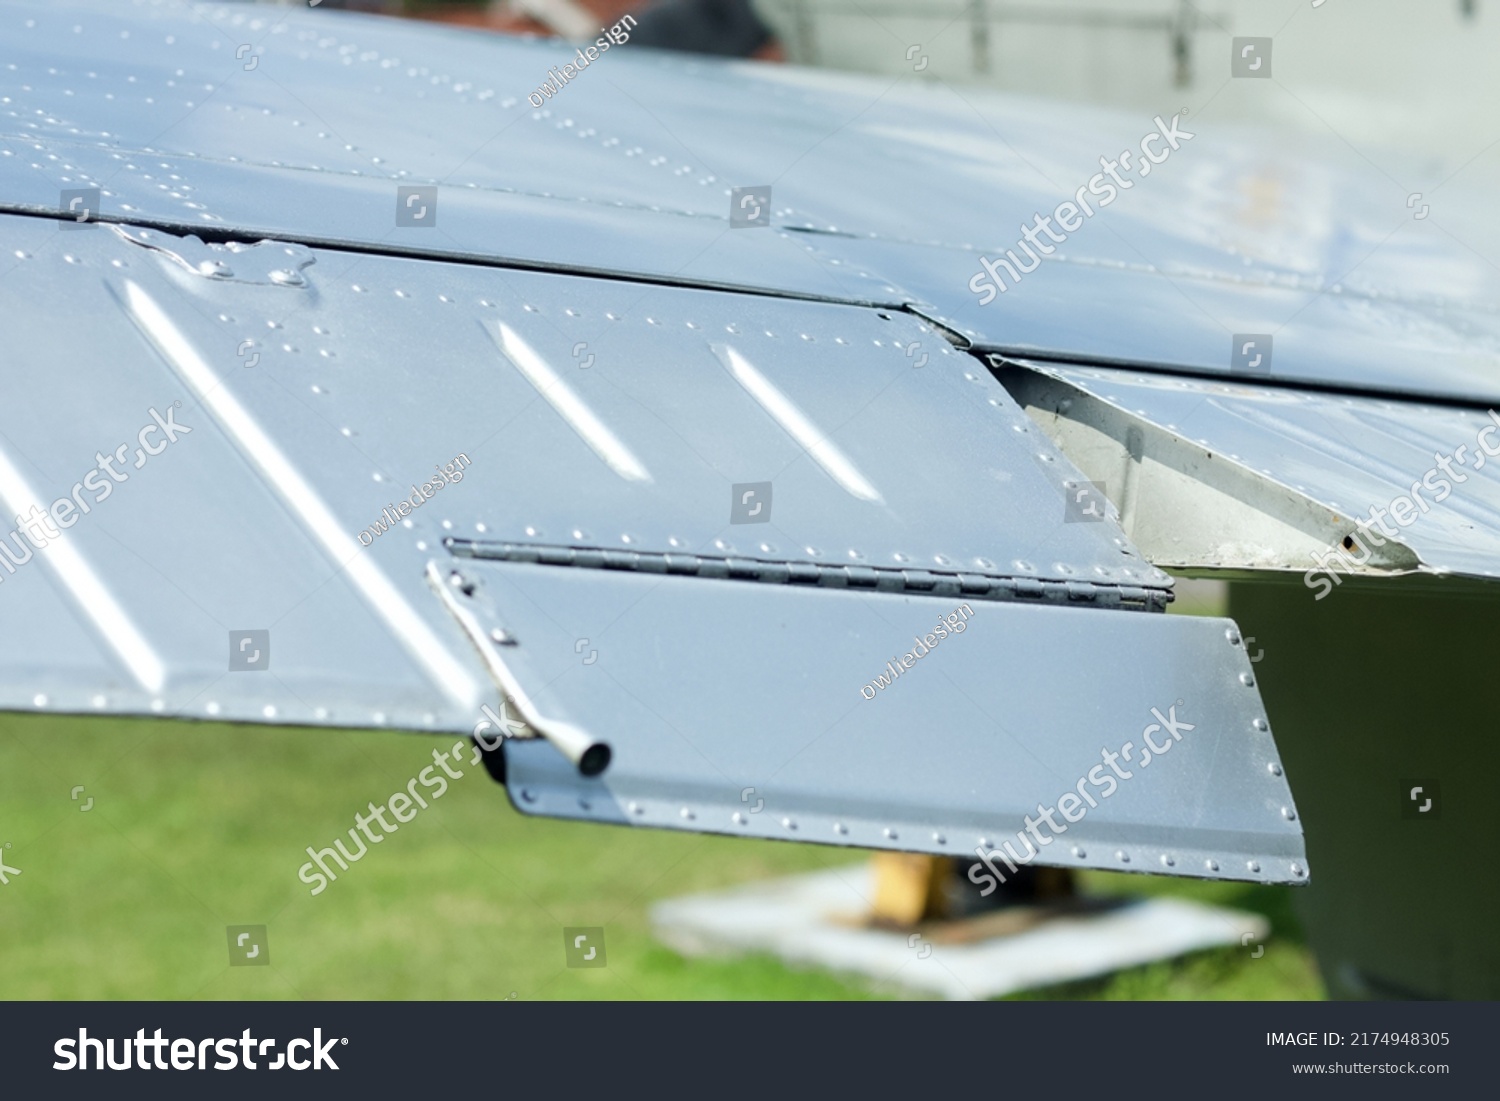 Close up image of an airfoil of an old aircraft #2174948305